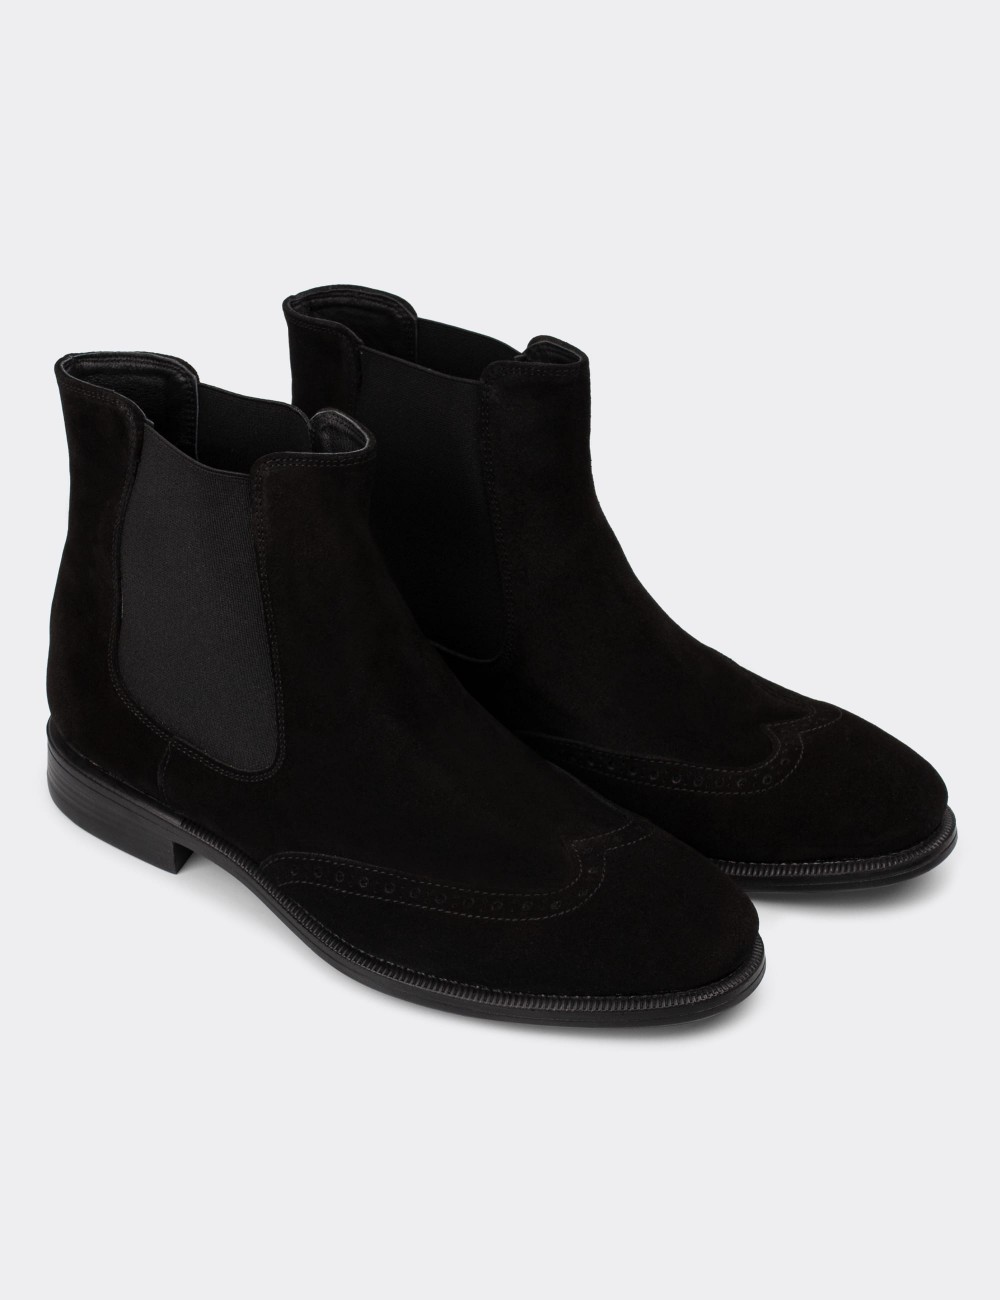 Black Suede Leather Boots - 01848MSYHC02